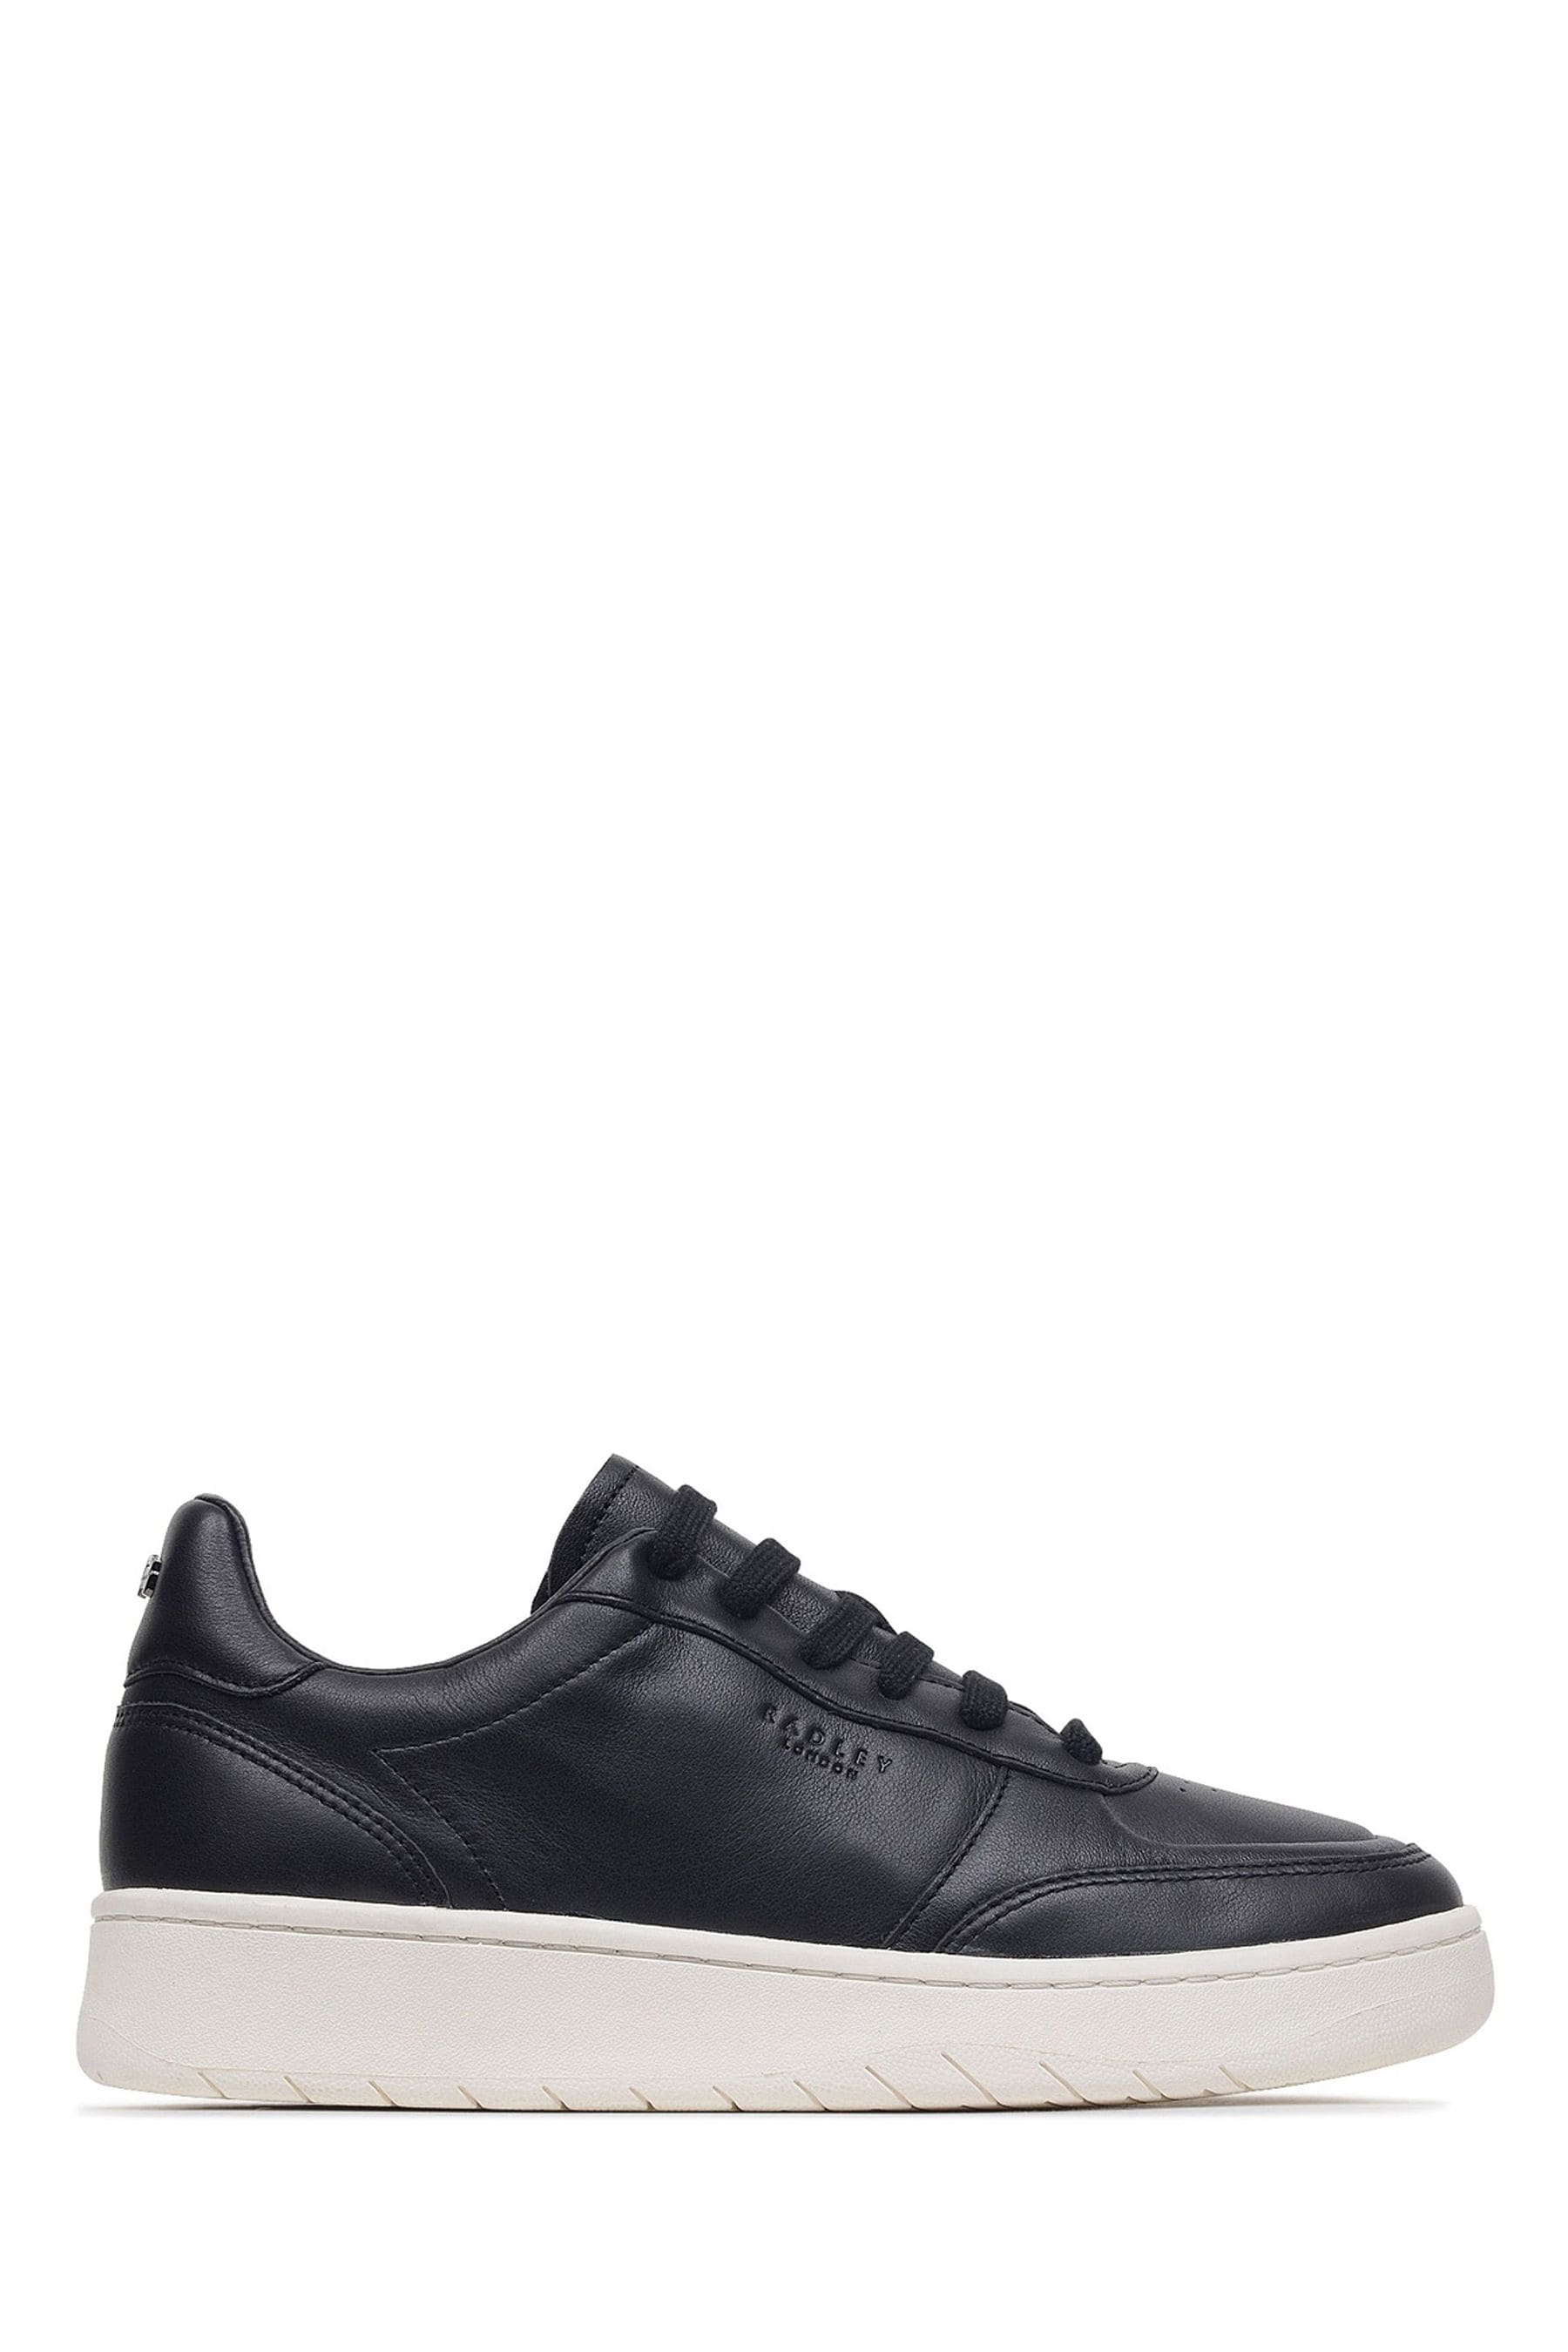 Buy Radley London Danesdale Trainers from the Next UK online shop